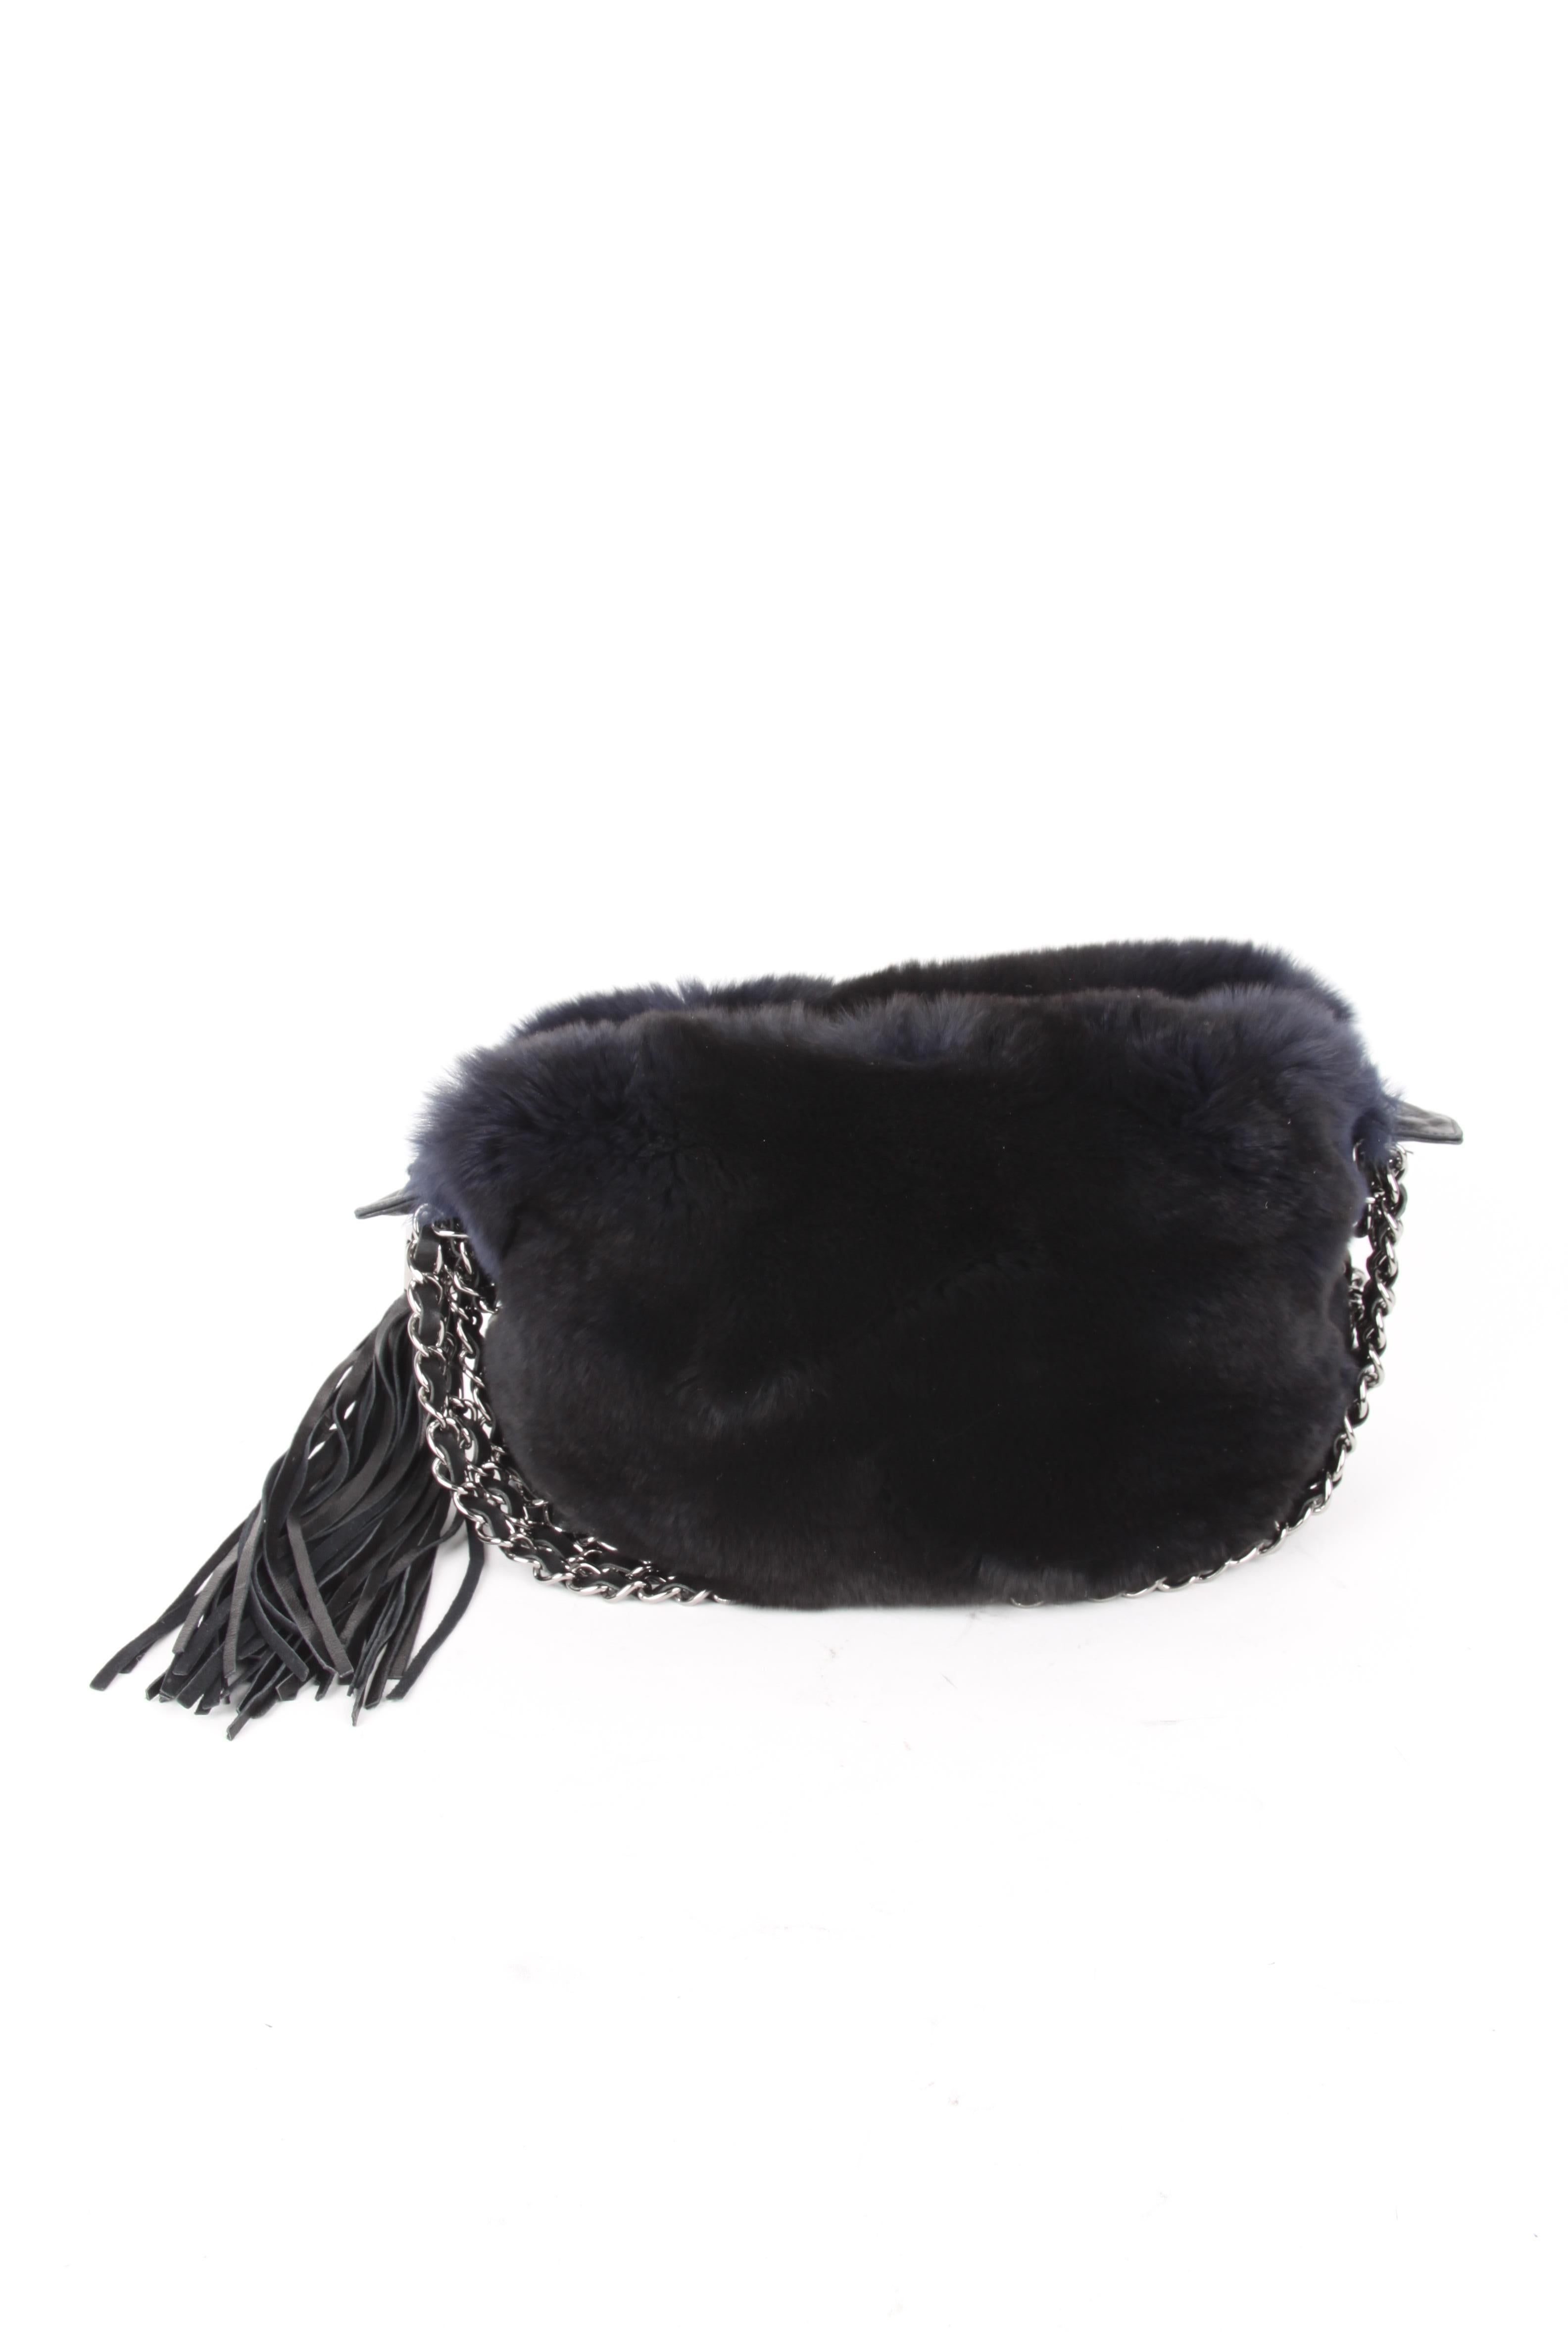 Chanel Blue Rabbit Fur Leather Three Chain Shoulder Handbag.

This little bag makes a big statement. It features a lux blue rabbit fur exterior with a silvertone chain and black entwined leather handles. The bag features a blue silk lining, zipper